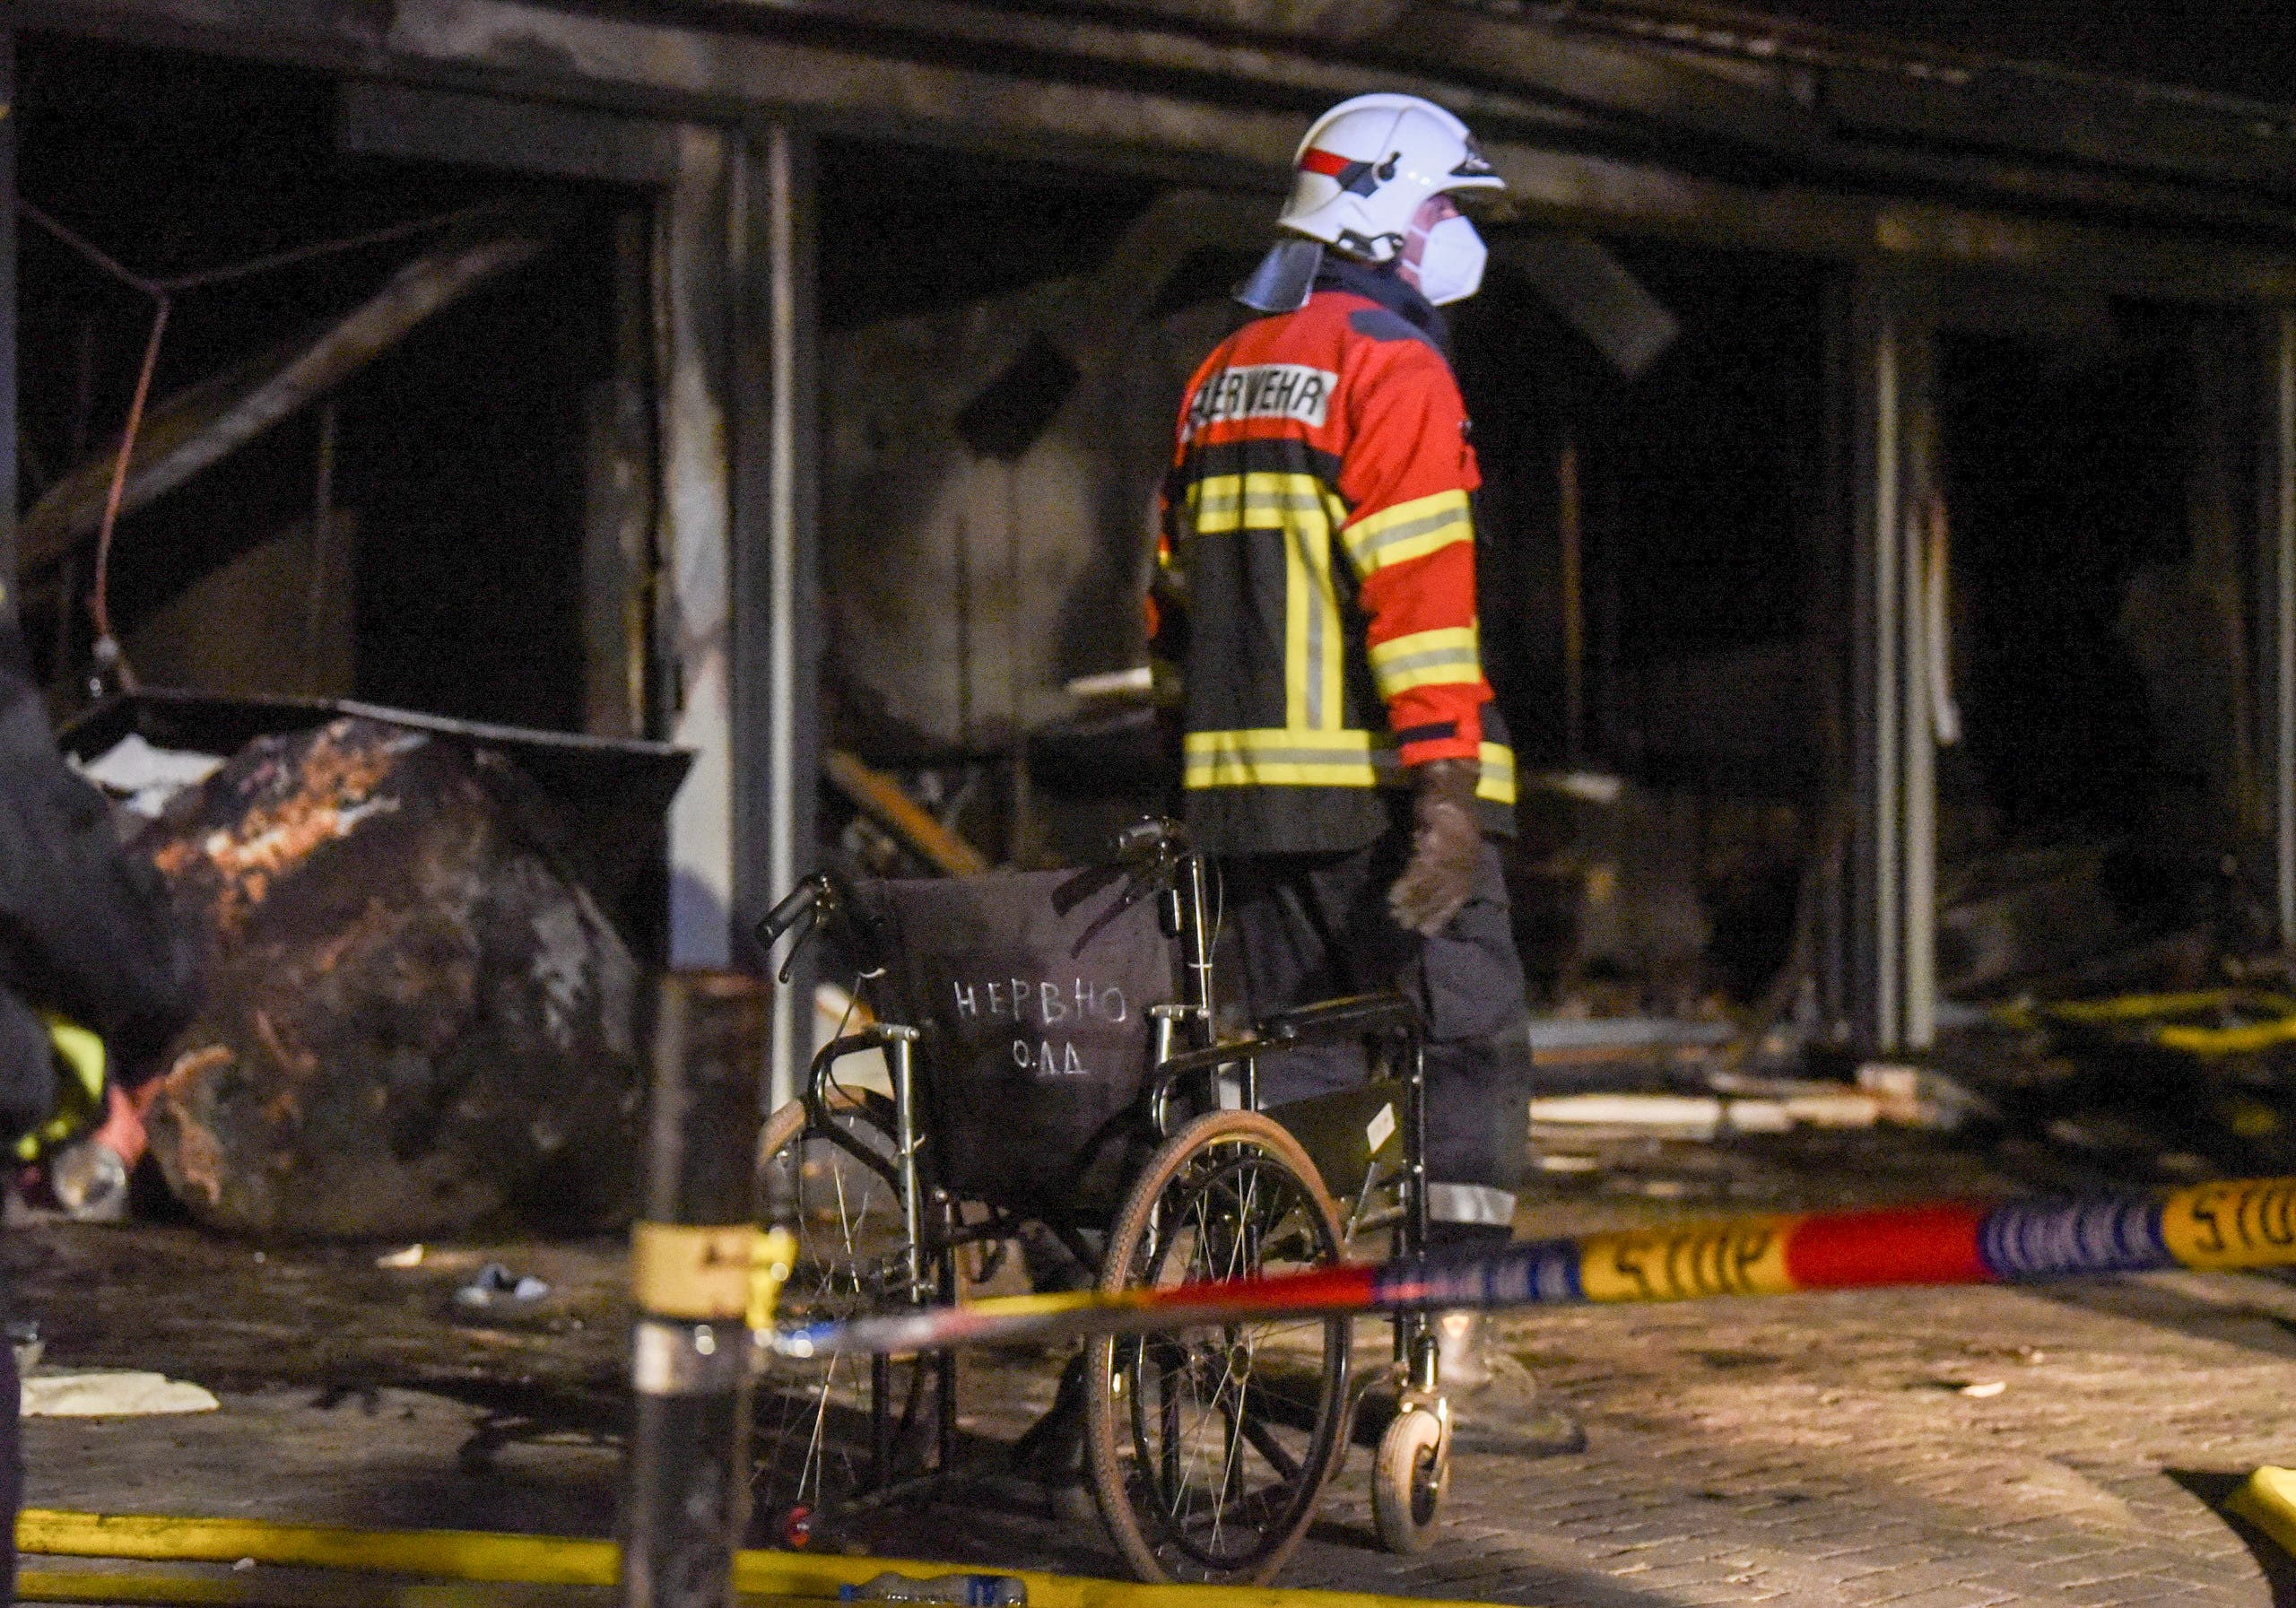 Police and firefighters inspect the scene at a COVID-19 clinic after a fire broke out, in Tetovo, North Macedonia on September 8, 2021. (AFP)